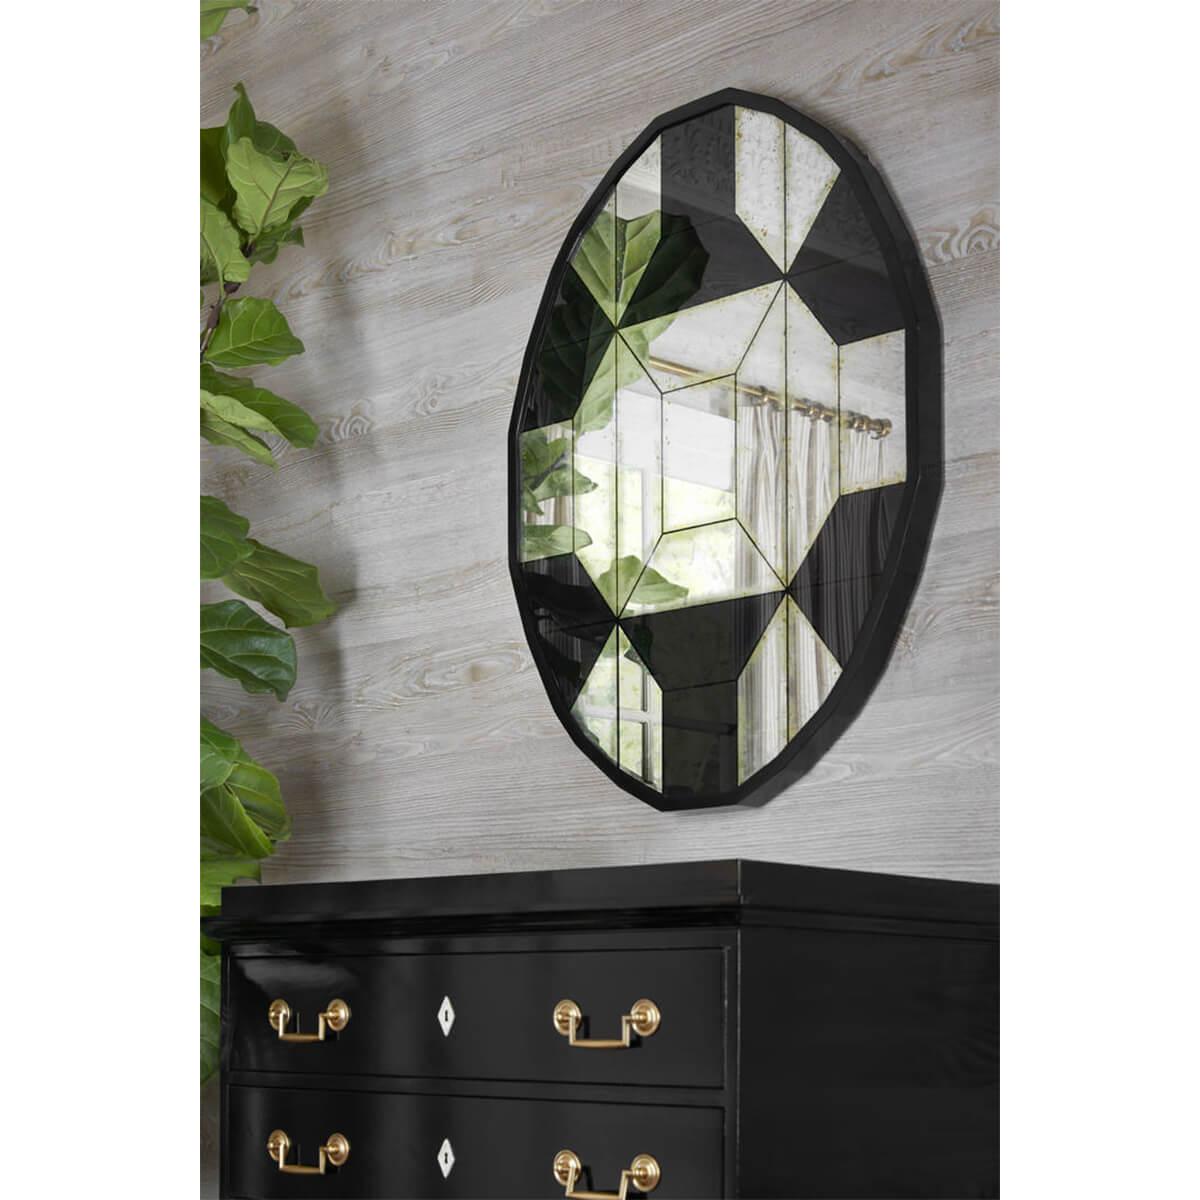 An Art Deco-inspired jeweled mirror, this faceted mirror plays with illusion and reflection using eglomise and antiqued mirror all in the service of high impact.

Dimensions: 30.25